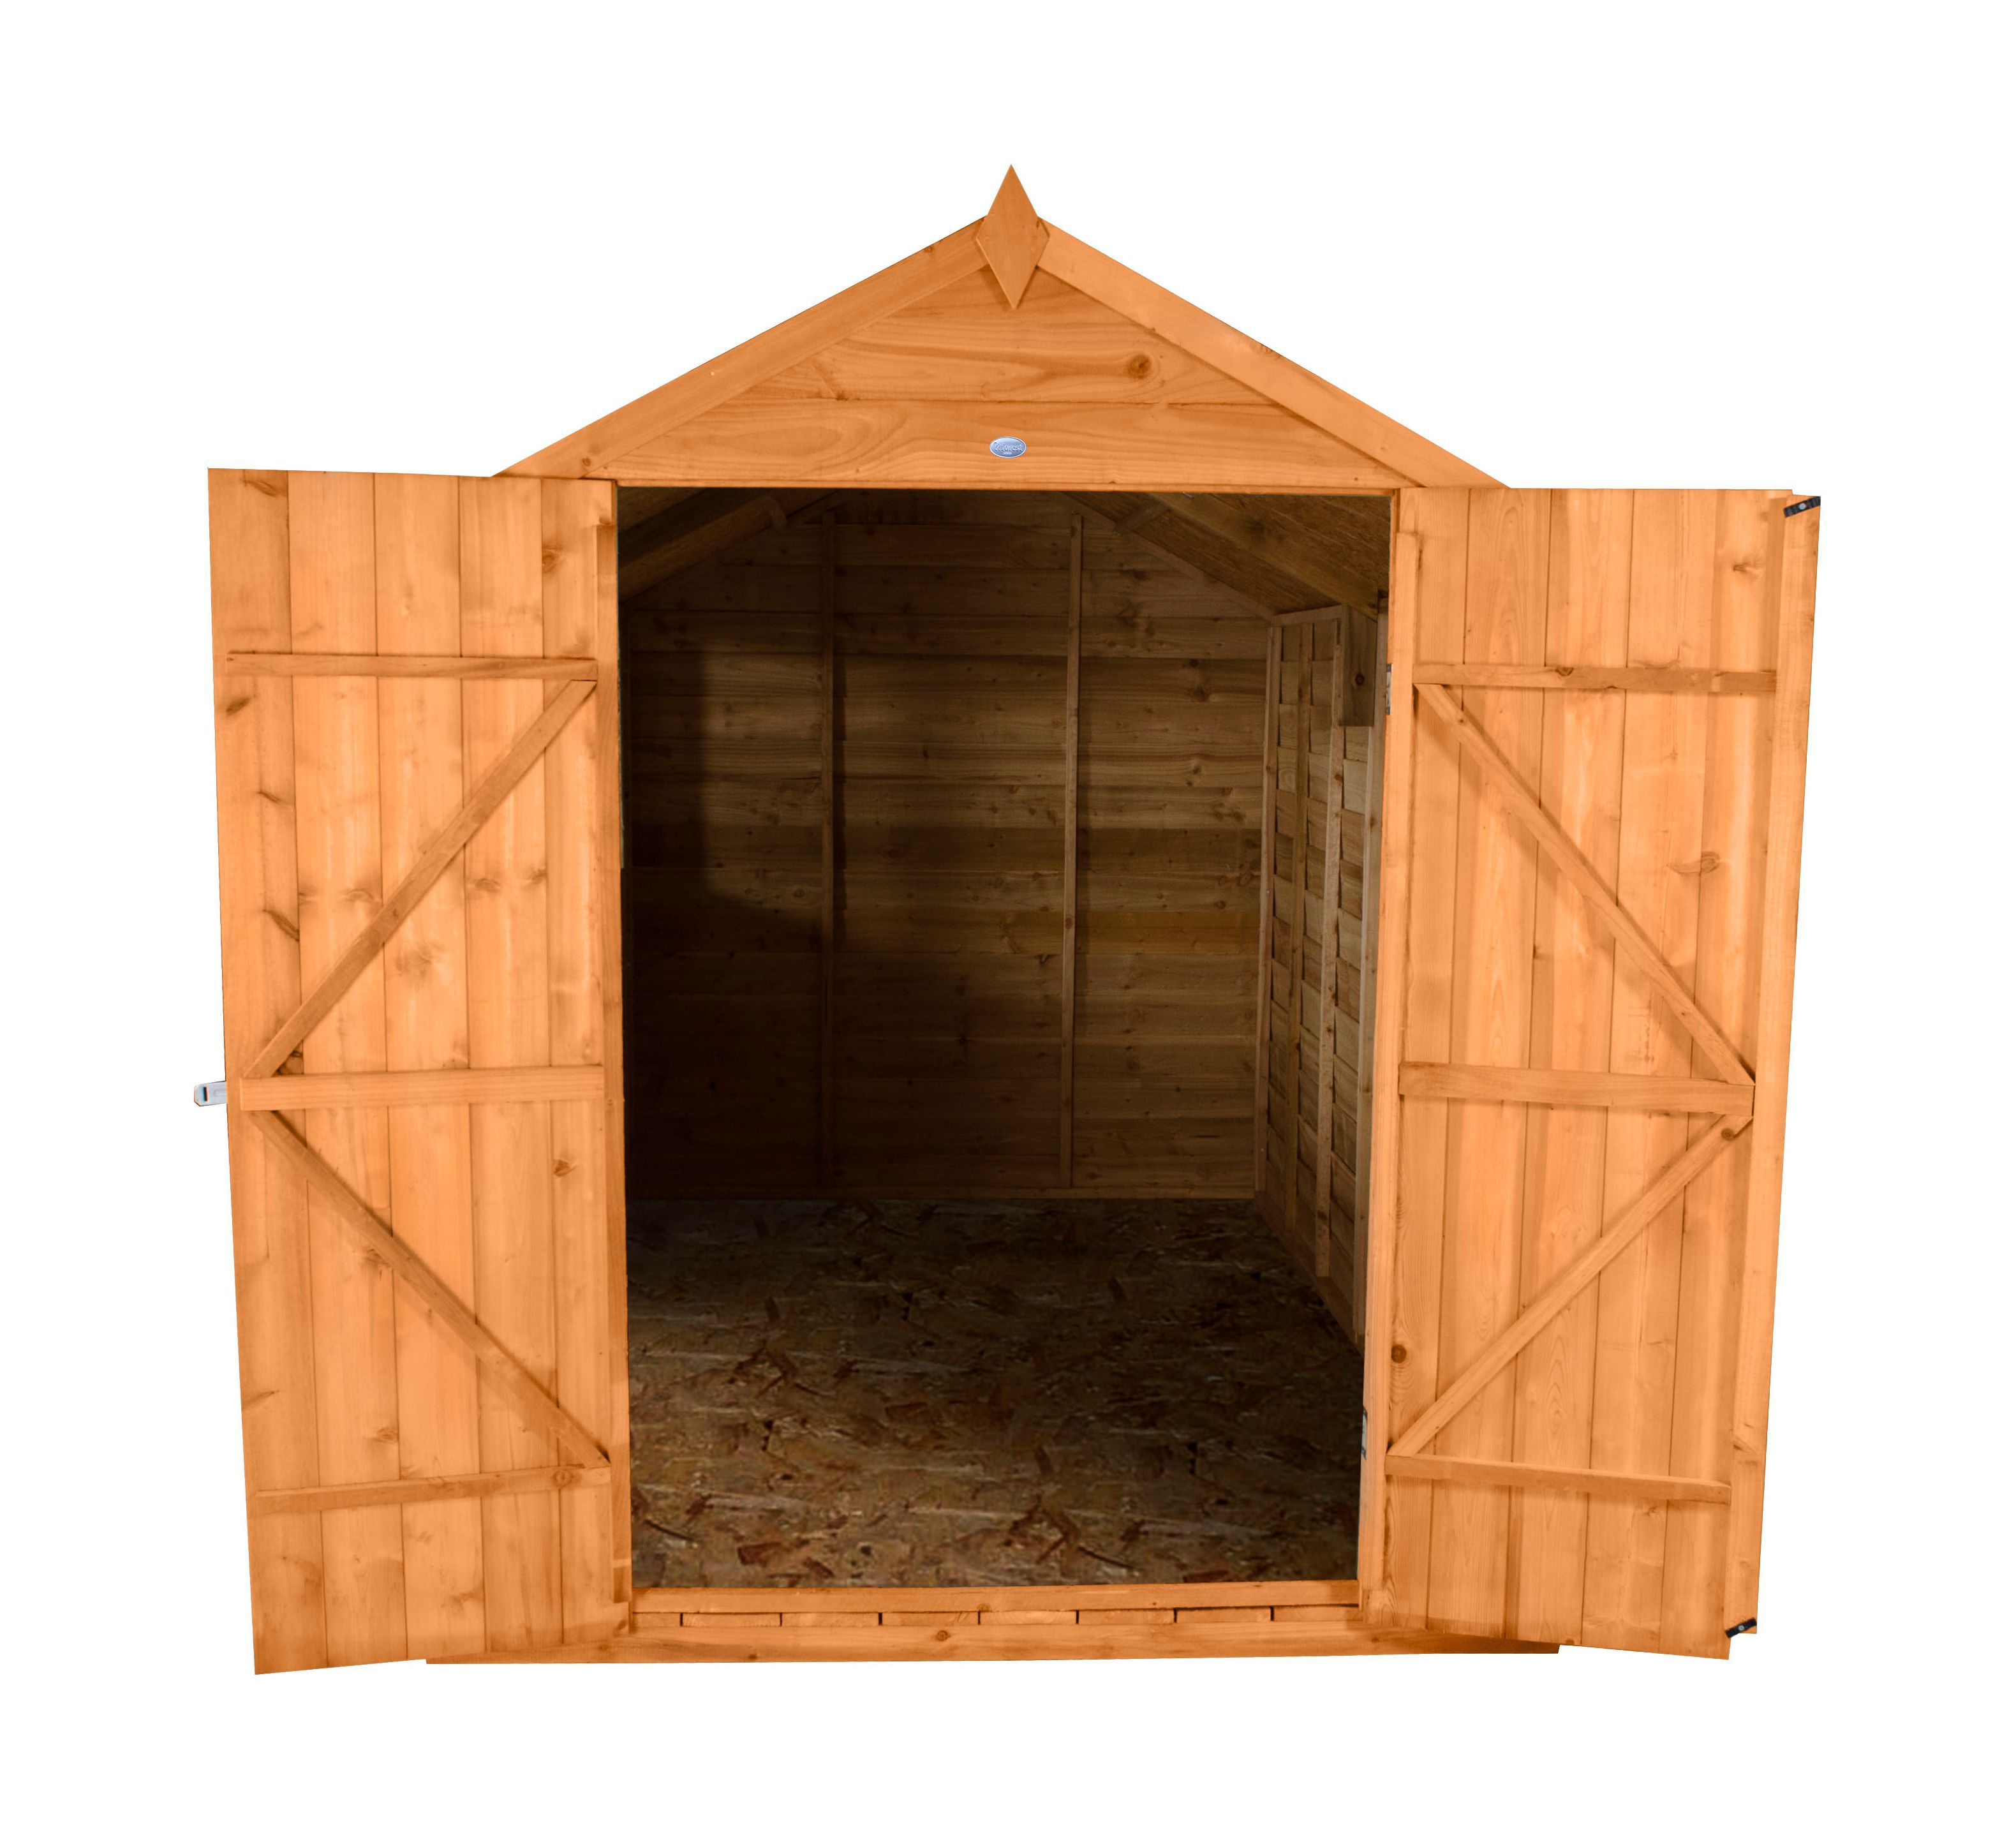 Forest Garden 10x6 Apex Overlap Wooden Shed